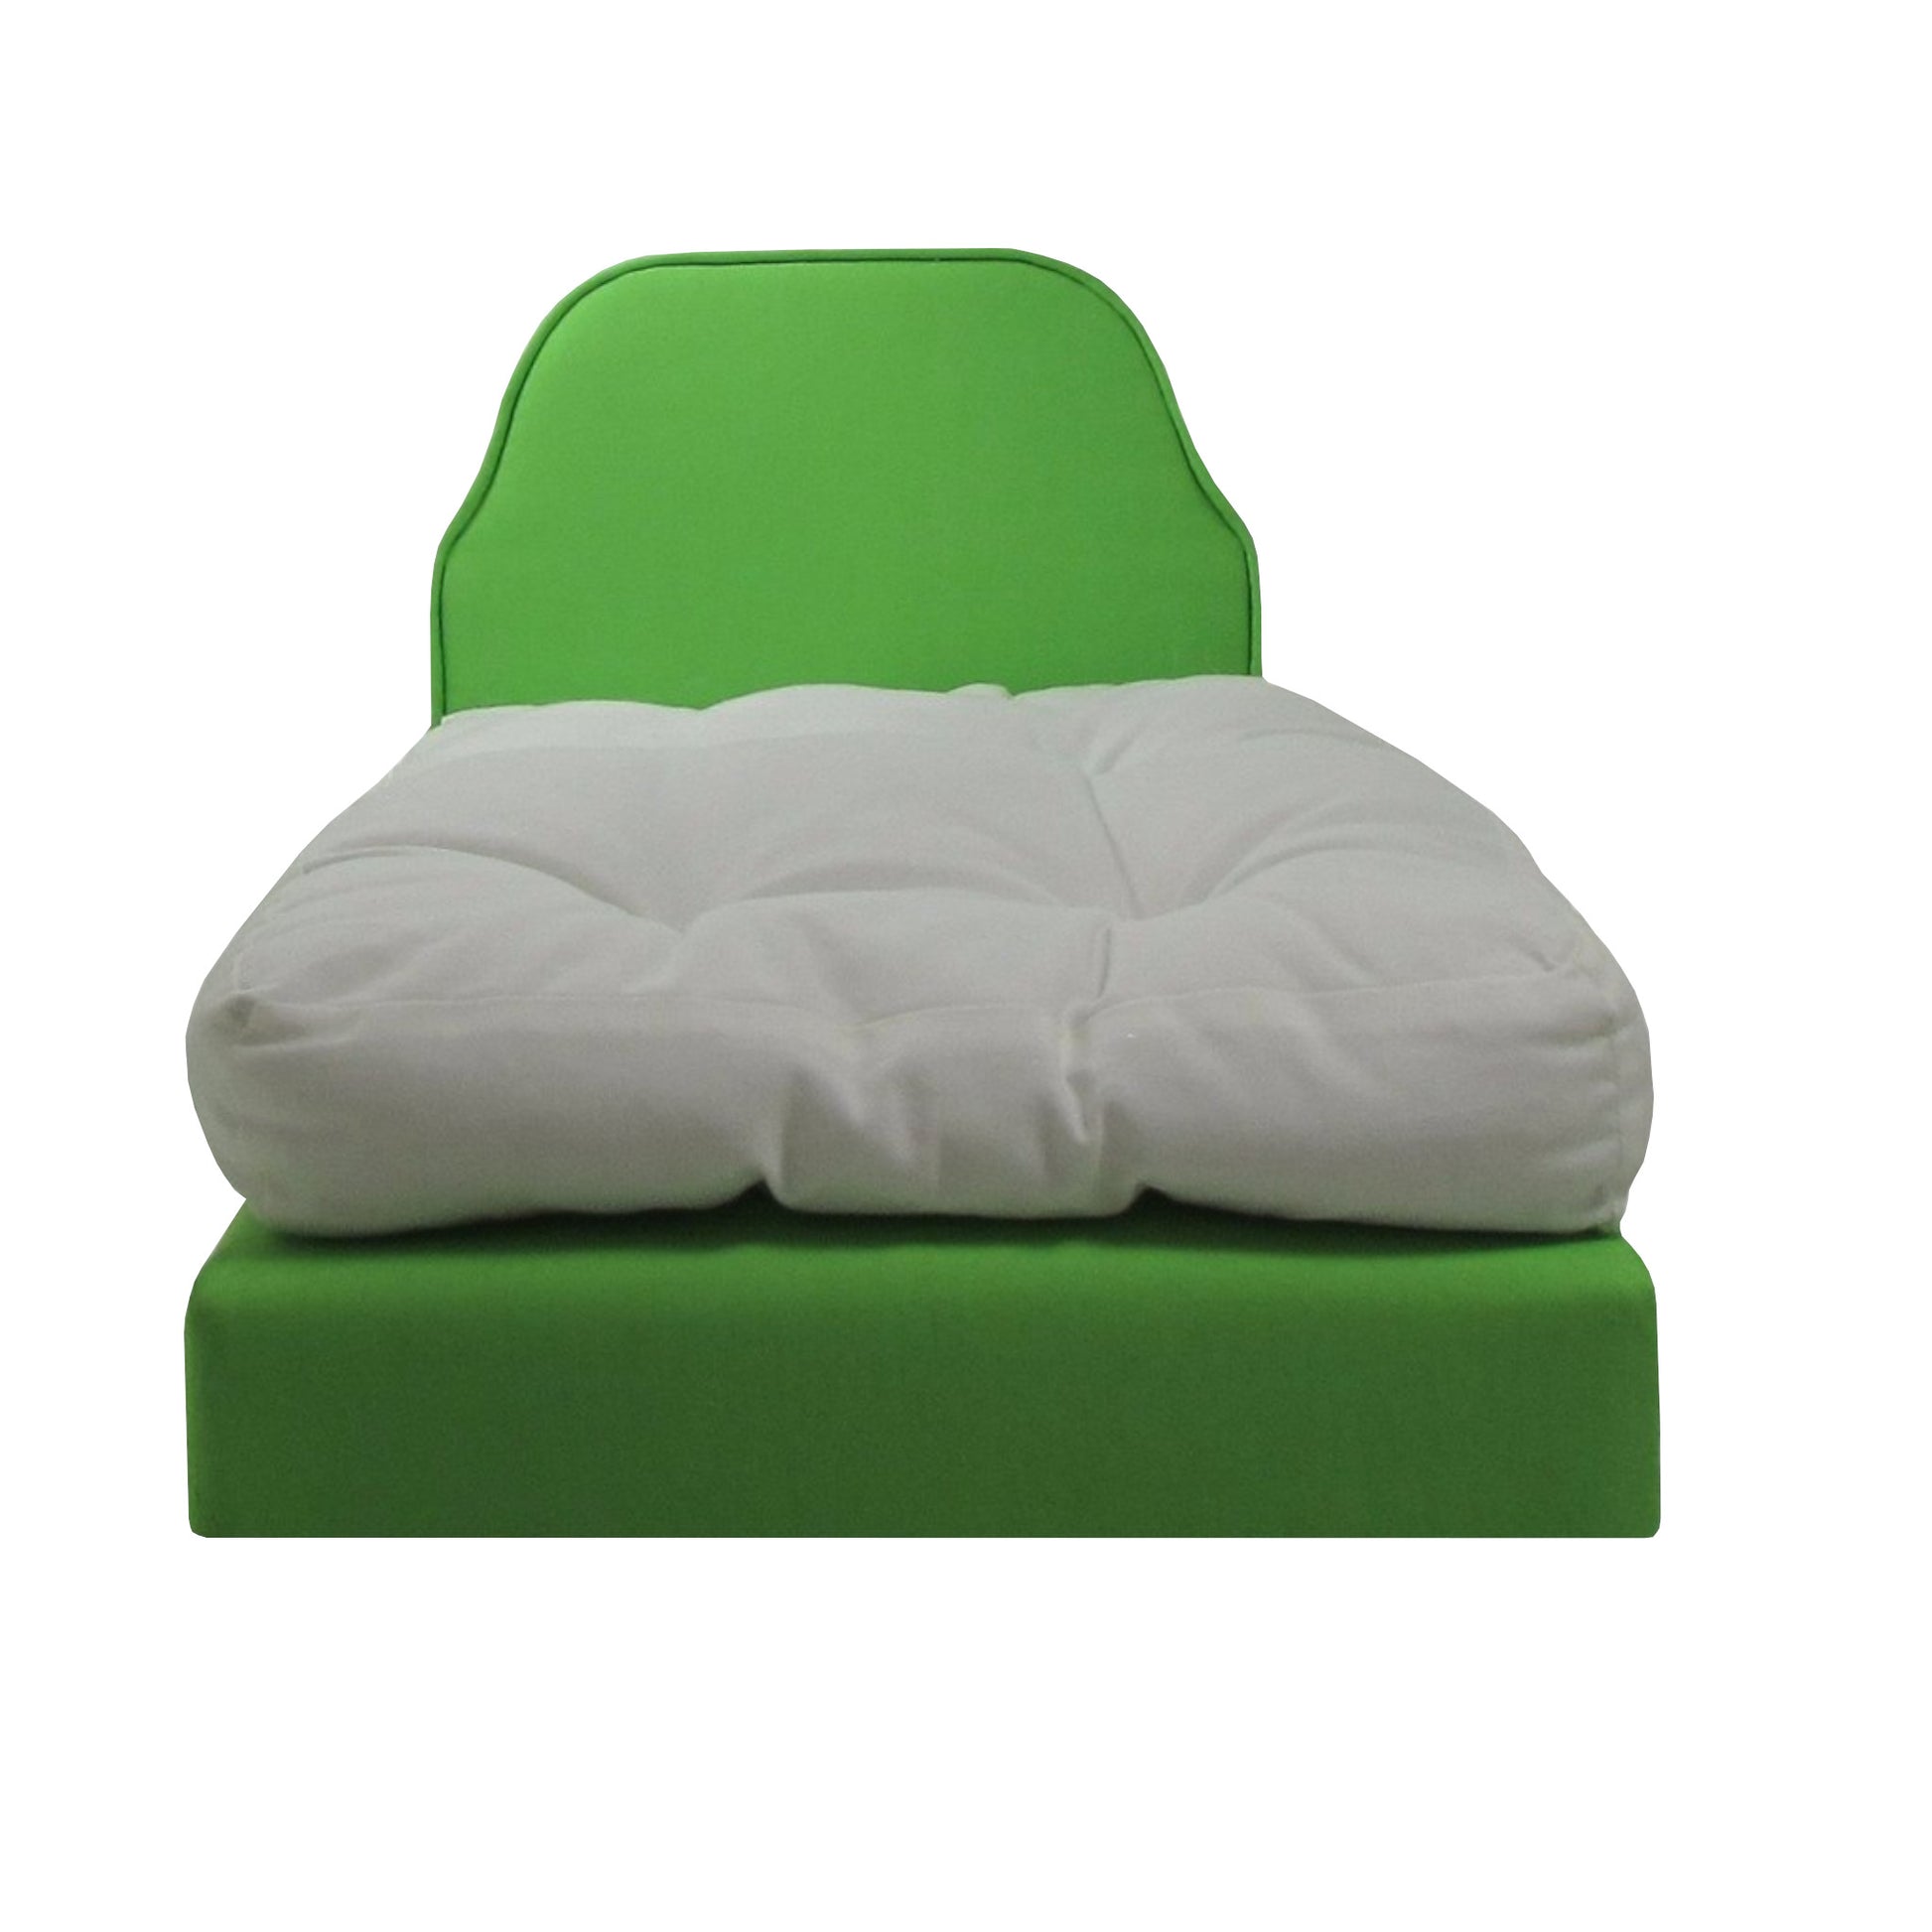 Upholstered Light Green Doll Bed for 18-inch dolls Second view